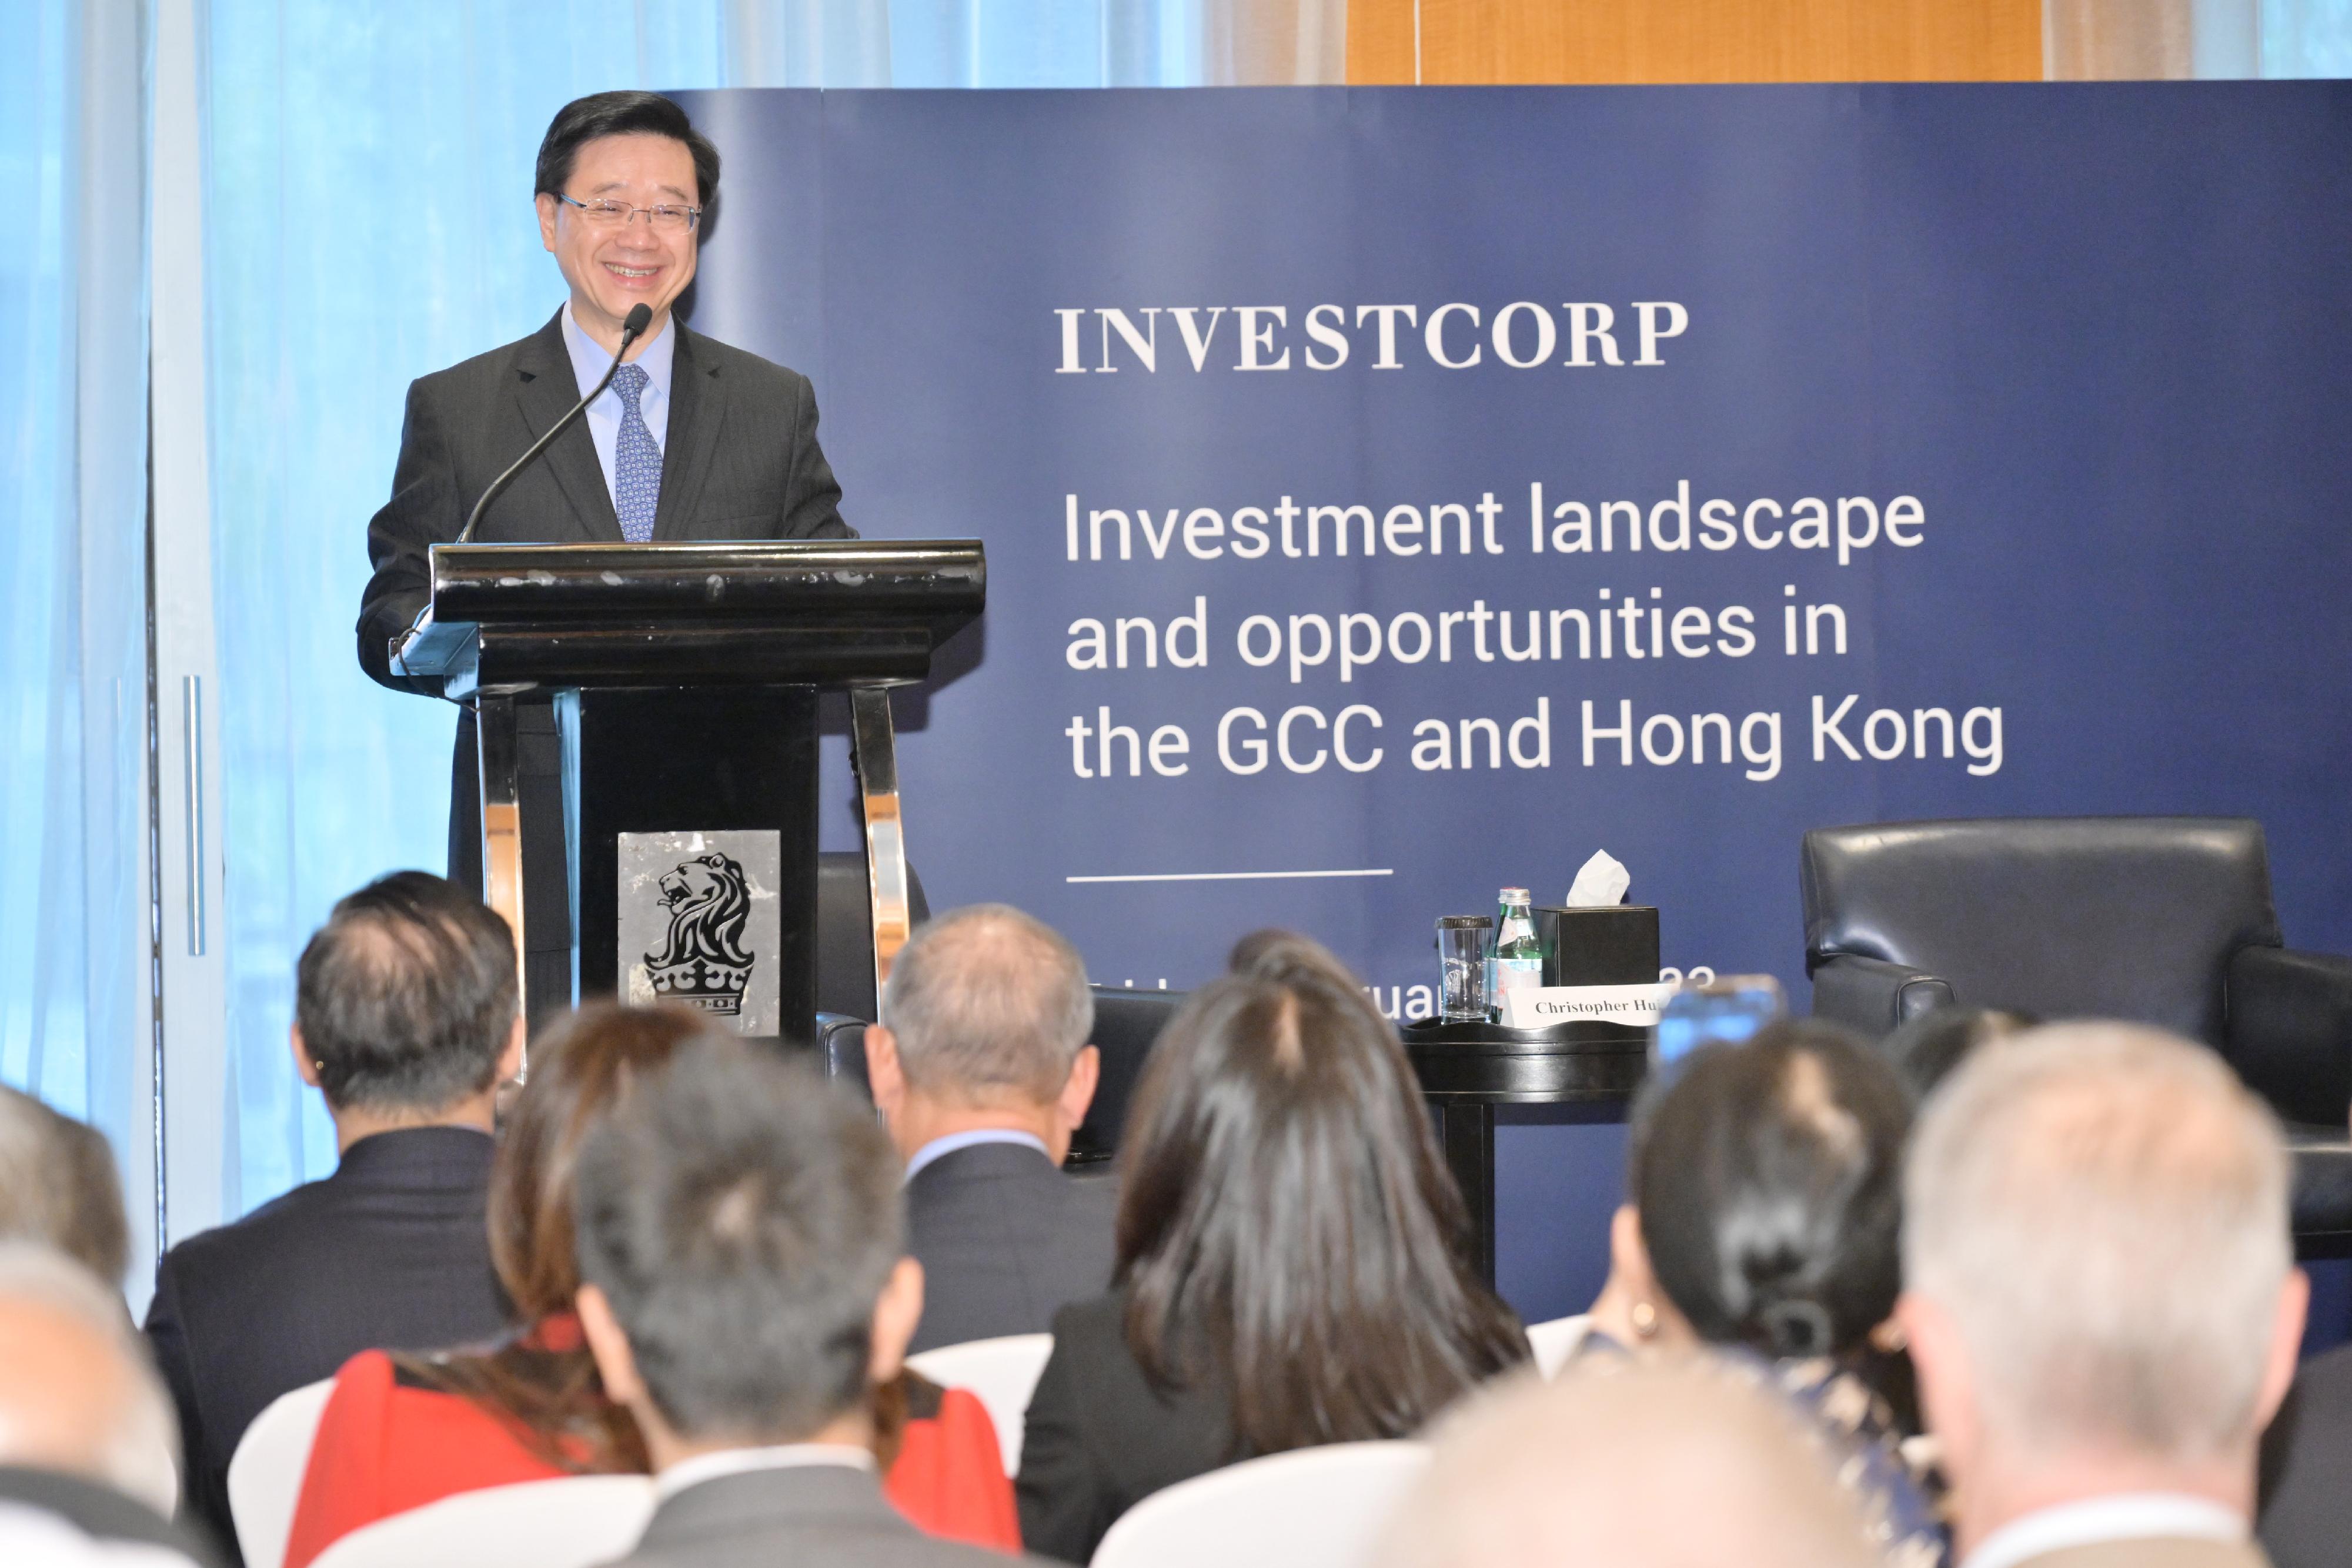 The Chief Executive, Mr John Lee, in Dubai, the United Arab Emirates, today (February 10, Dubai time) attended a breakfast meeting hosted by Investcorp, an alternative investment management company in the Middle East. Photo shows Mr Lee delivering remarks at the breakfast meeting.